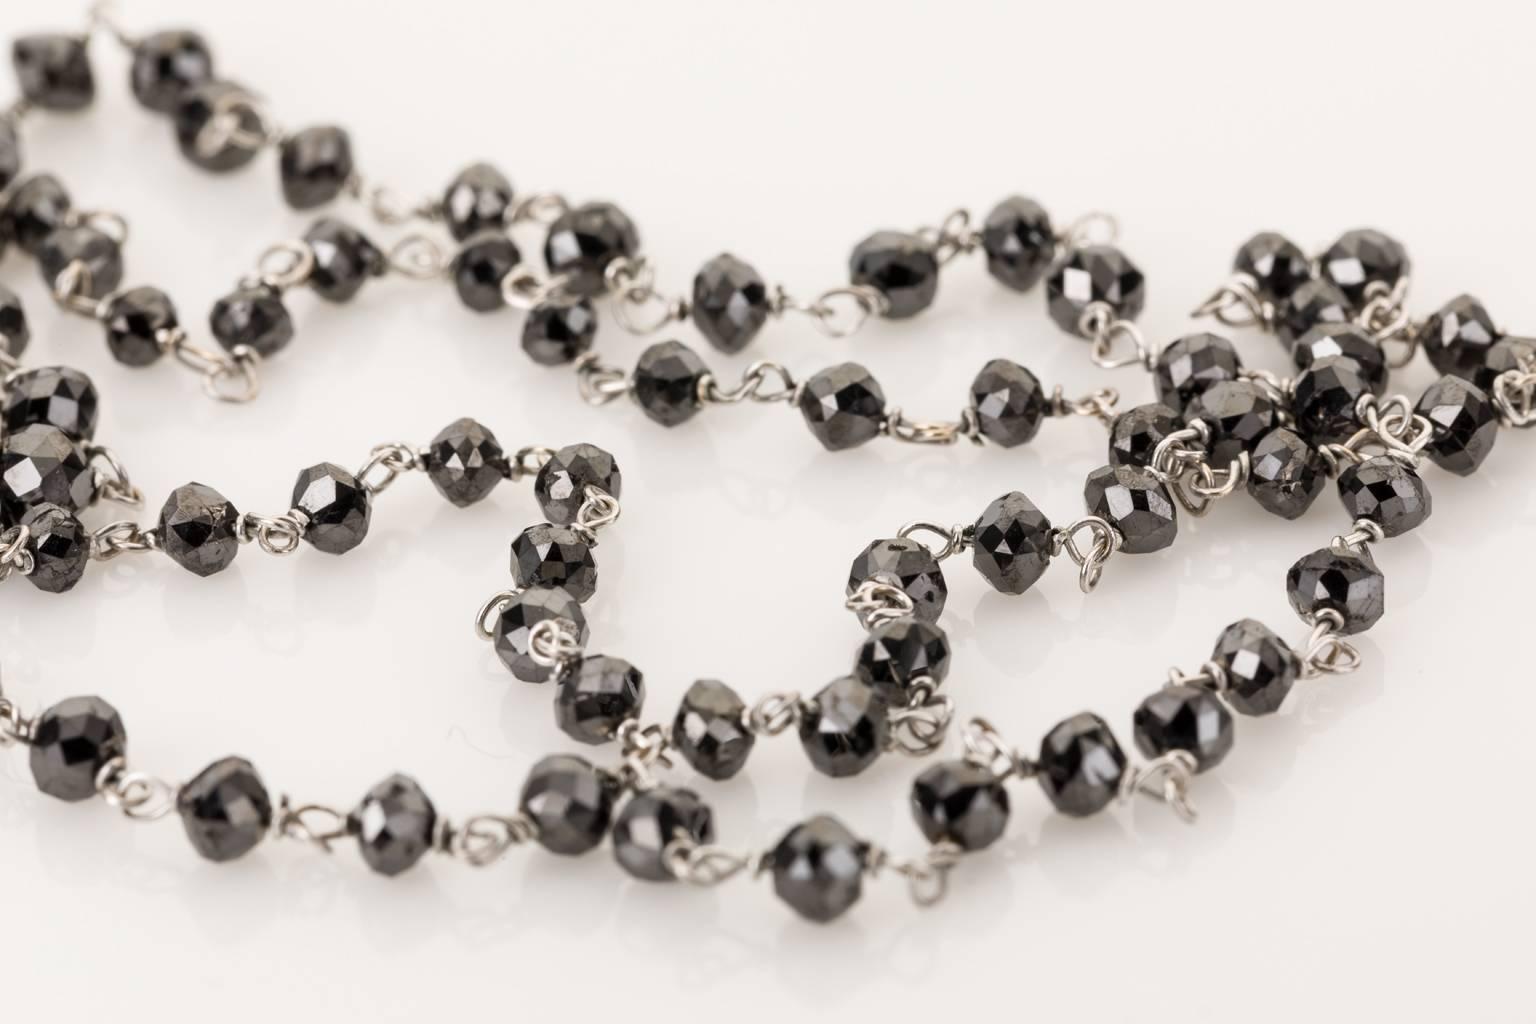 Black Diamonds have a magical look to them. Since diamond is the hardest substance known to man these gems can take an extremely high polish so they have so much sparkle and life to them. This handmade black diamond necklace features 15.12cts of